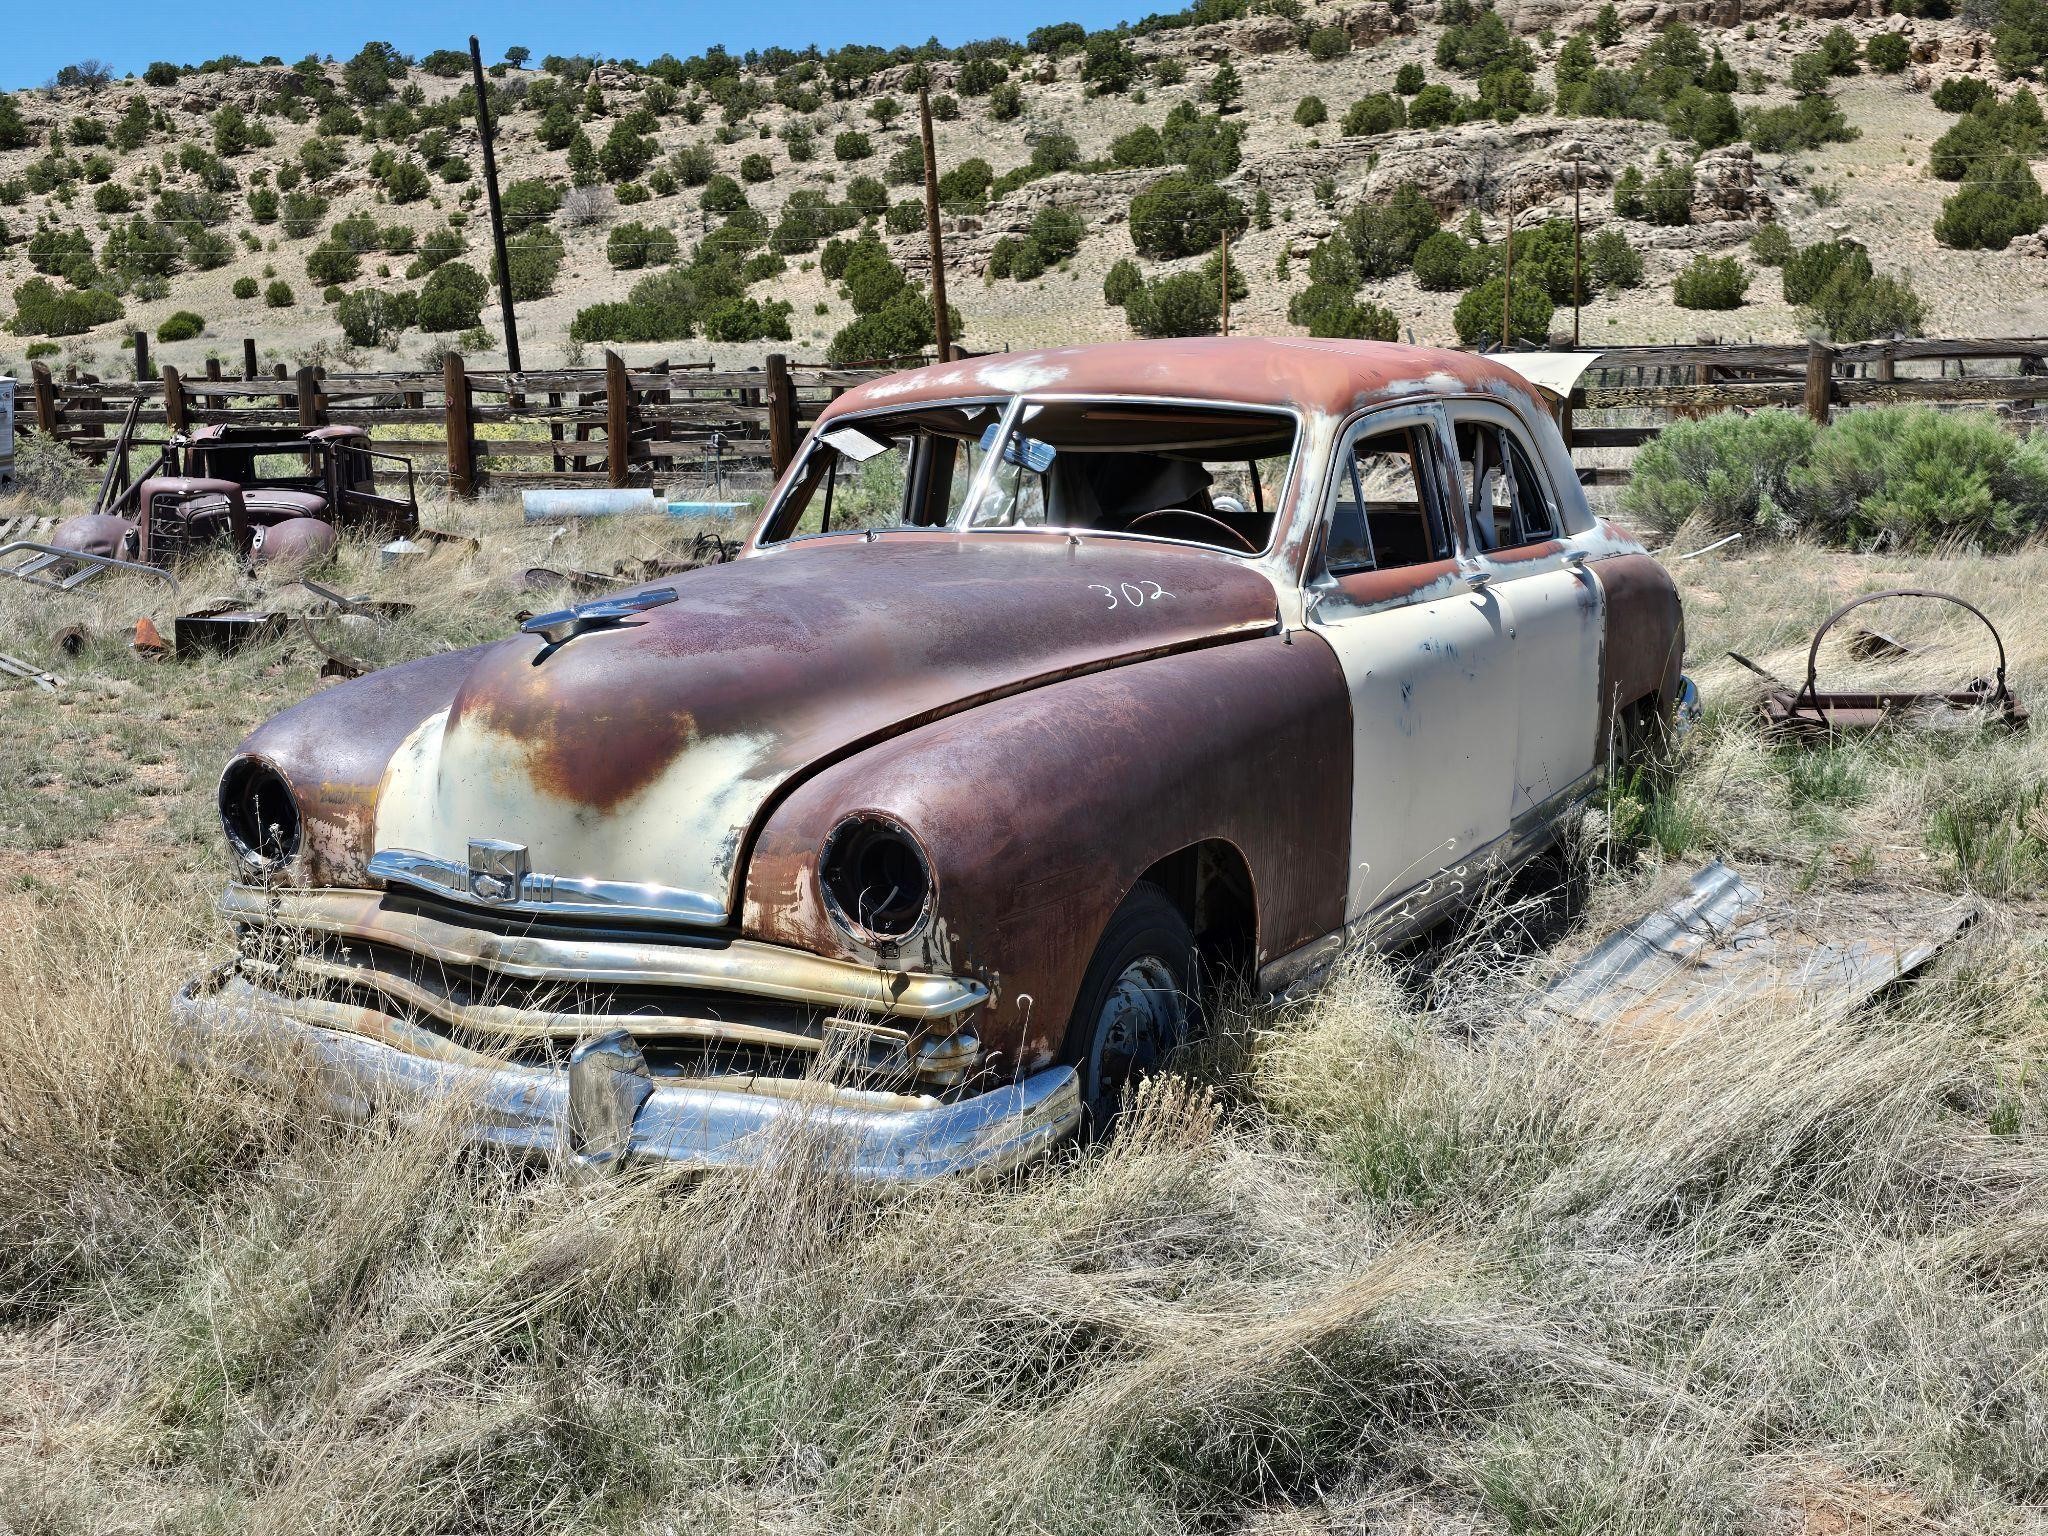 Antique Vehicles, Boats & More - Located in Grants, NM